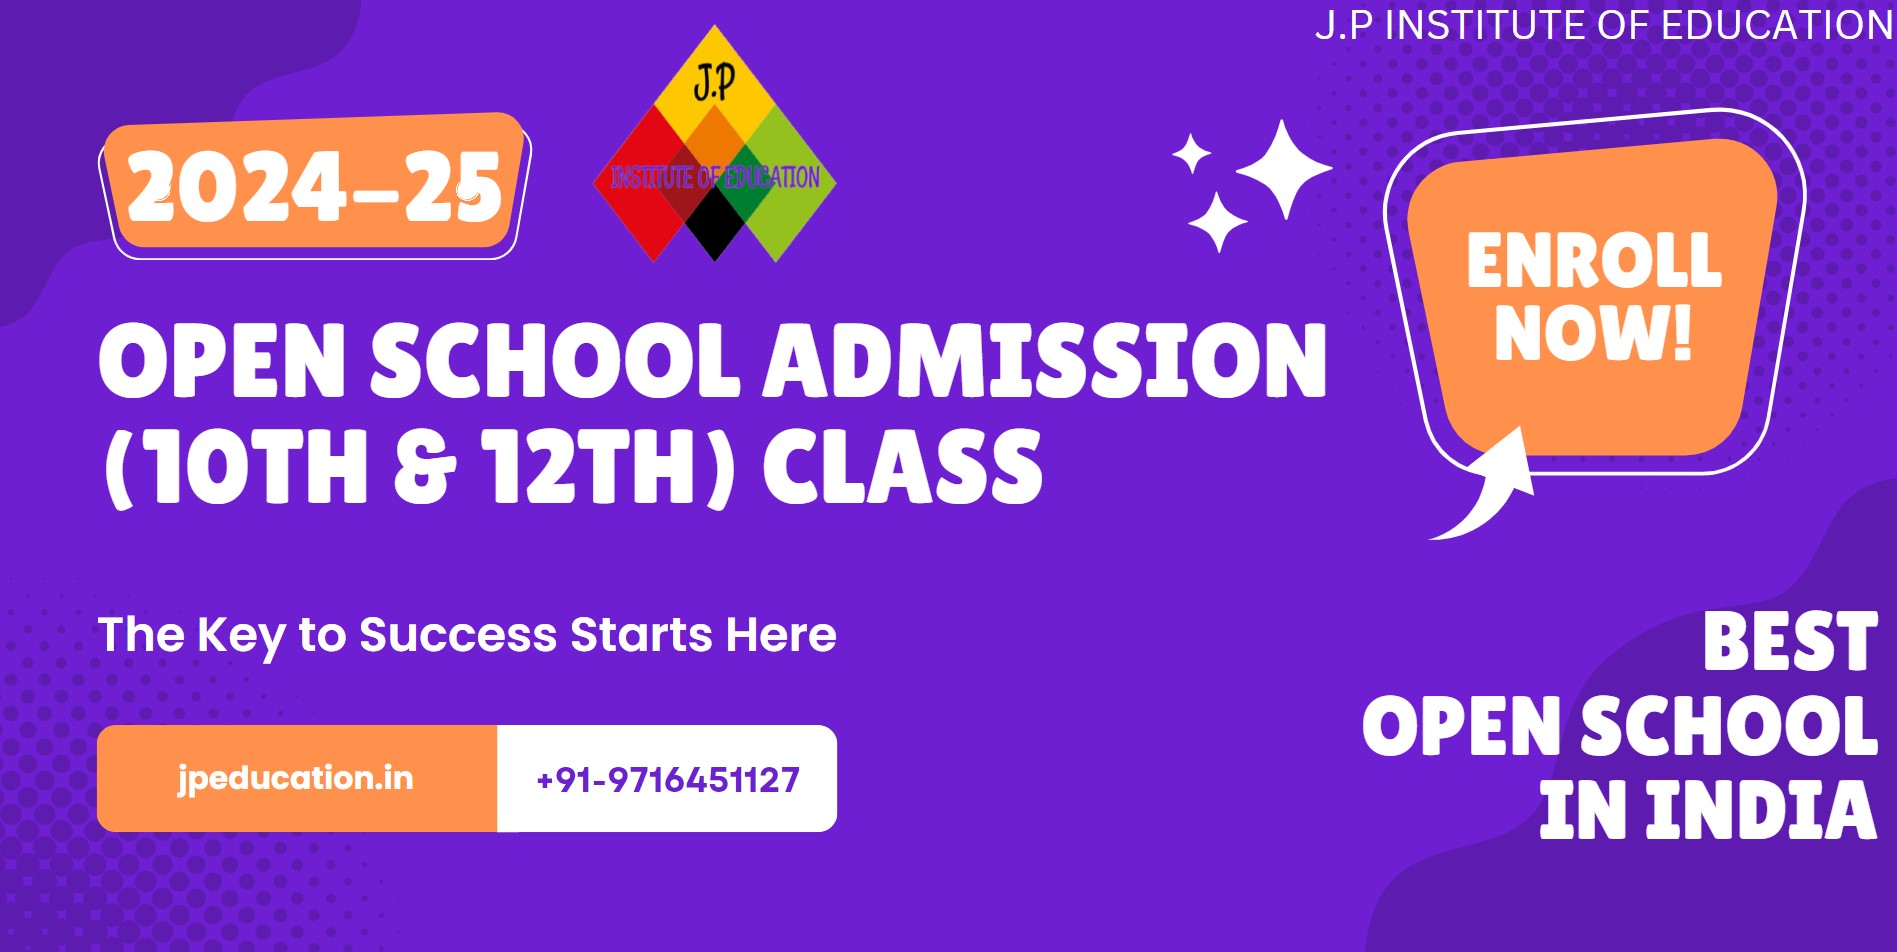 NIOS ADMISSION FOR 10TH AND 12TH CLASS